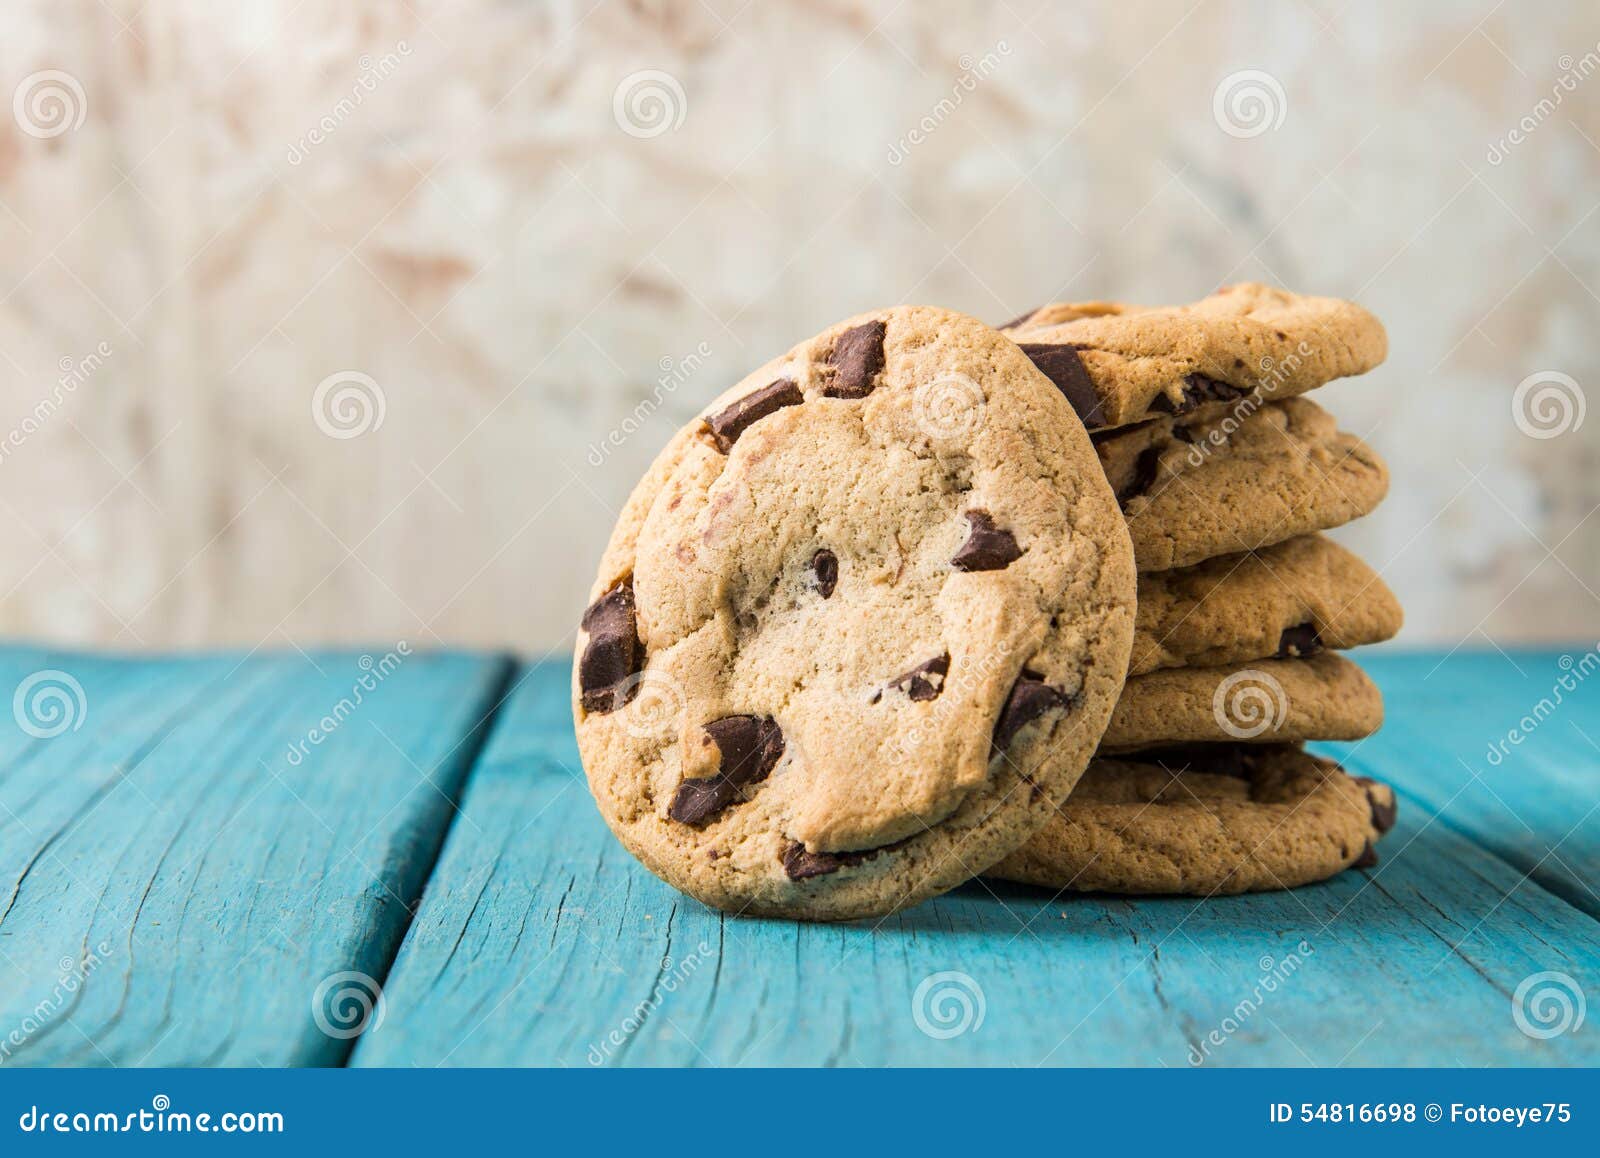 chocolate chip cookies on blue table